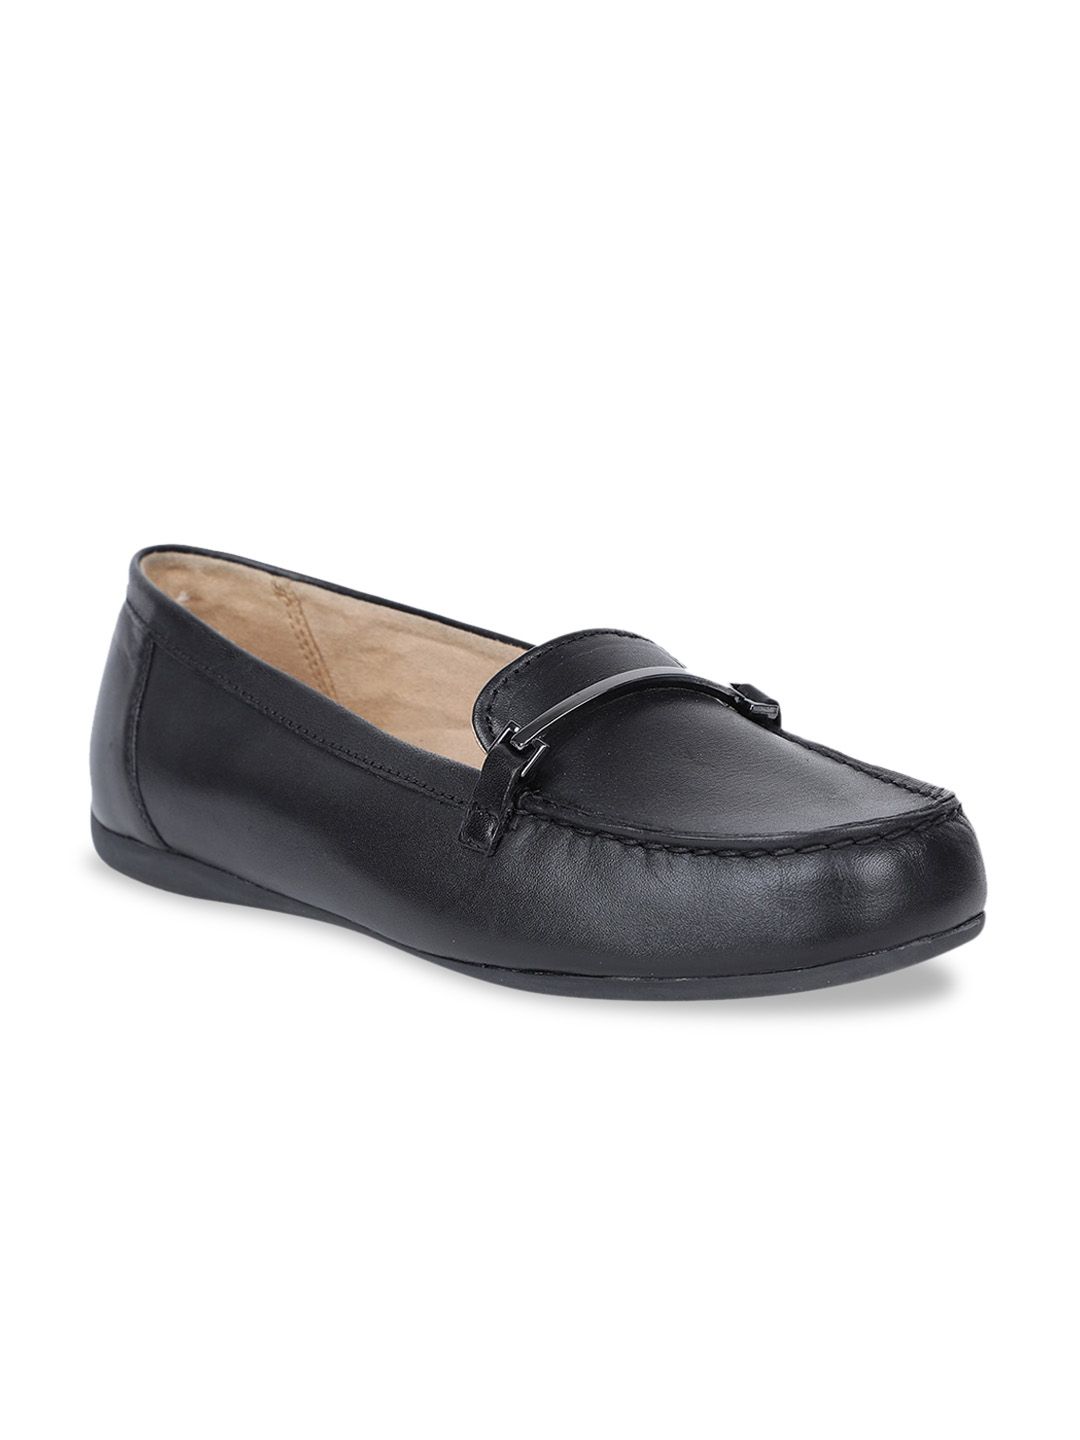 Naturalizer Women Black Solid Loafers Price in India